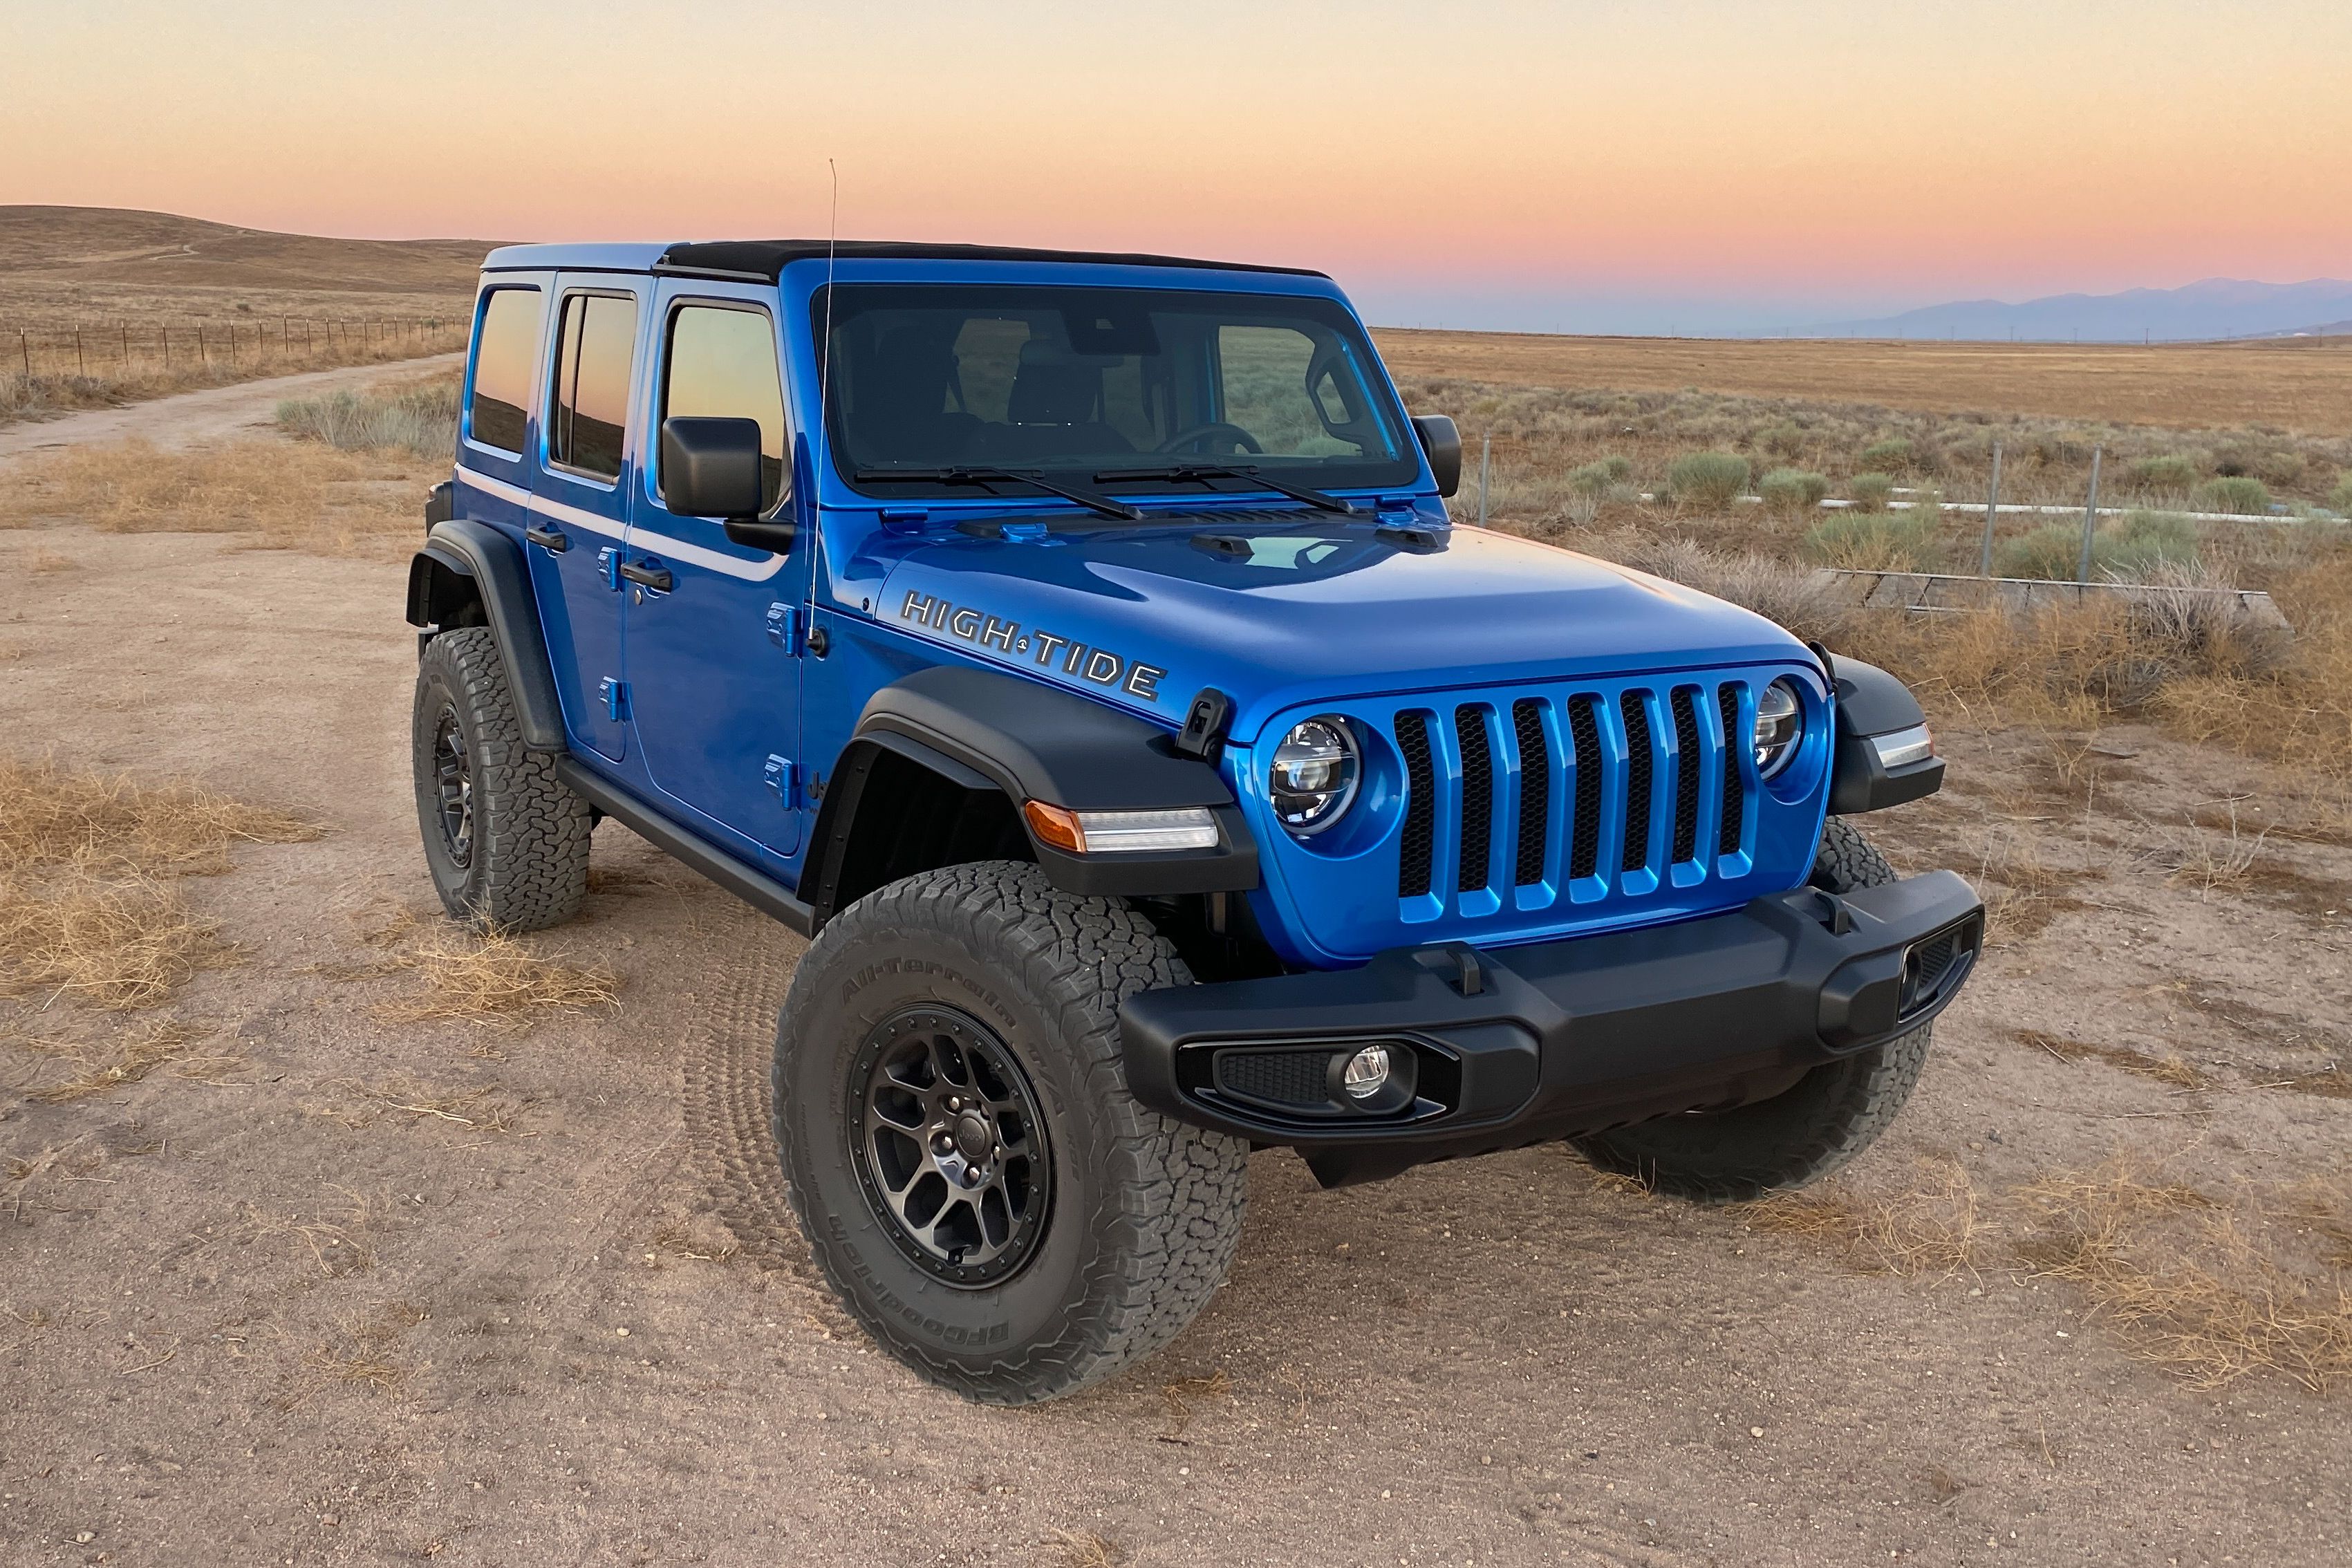 View Photos of the 2022 Jeep Wrangler High Tide